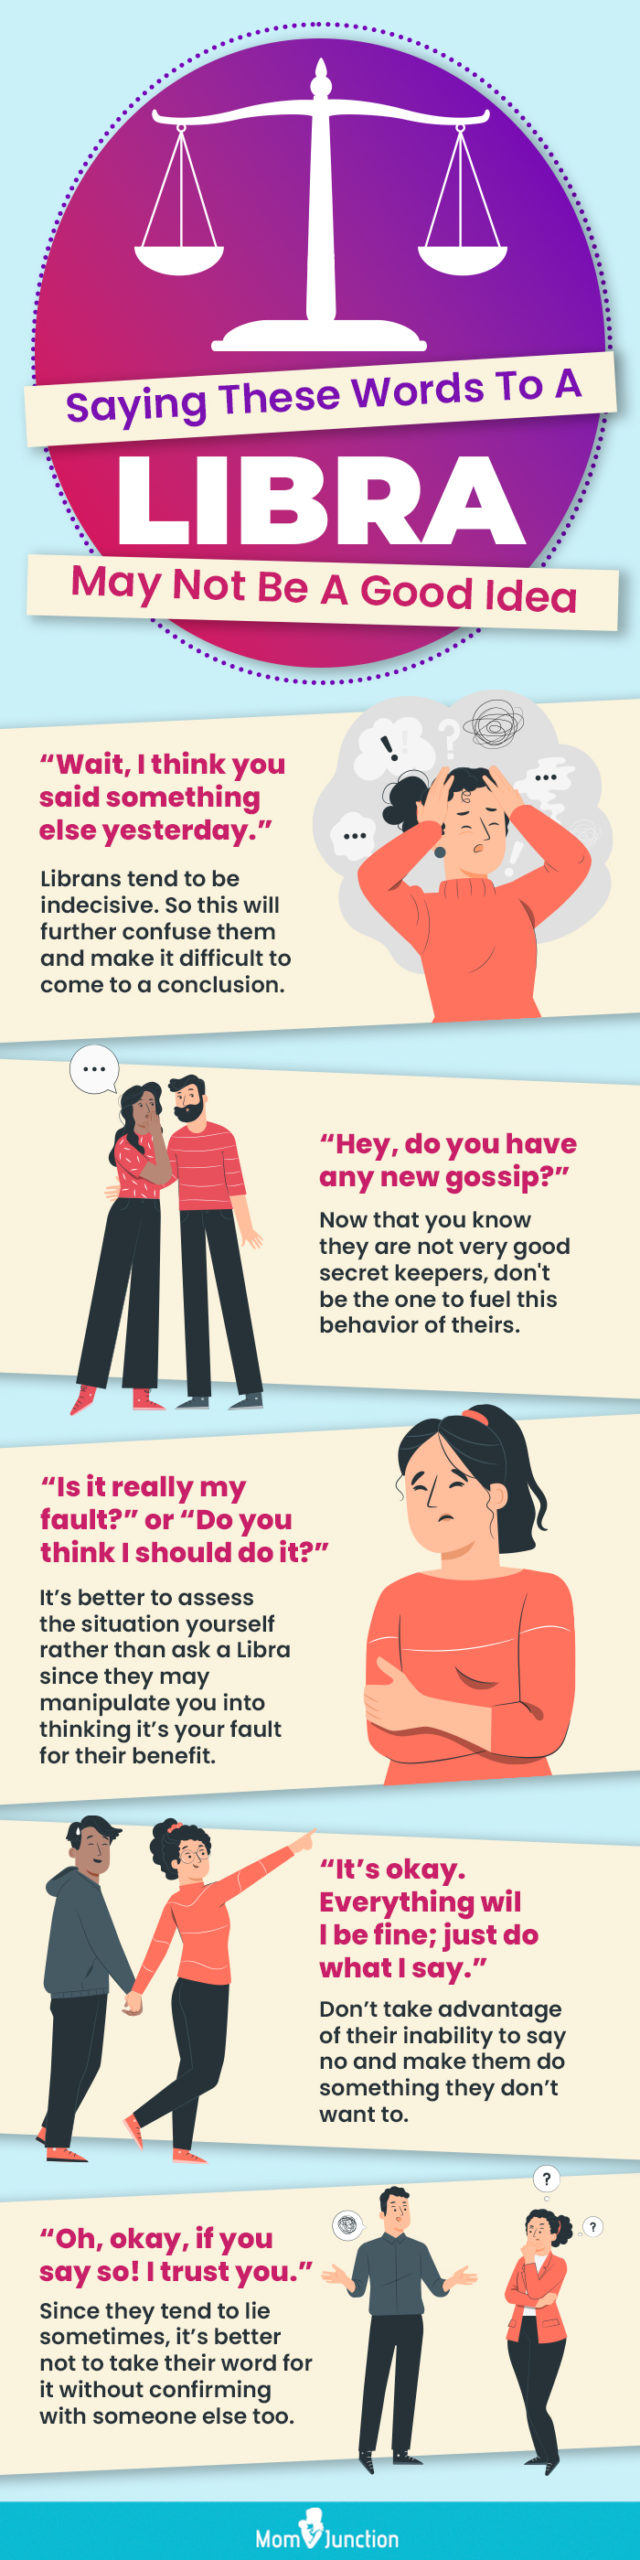 saying these words to a libra may not be a good idea (infographic)